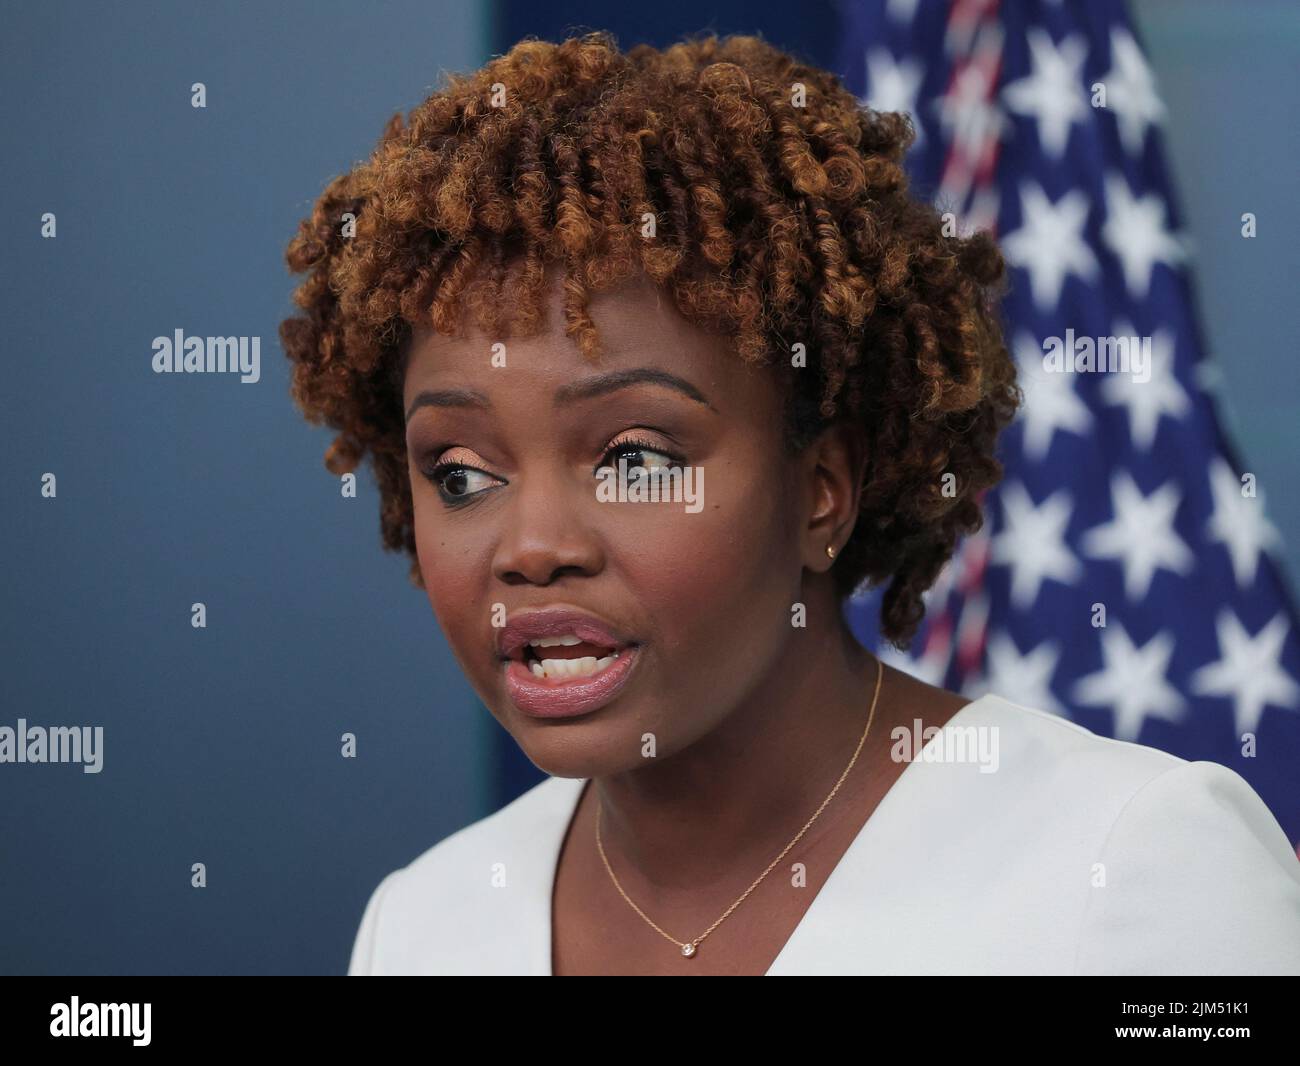 U.S. White House Press Secretary Karine Jean-Pierre answers questions during a news briefing at the White House in Washington, U.S. August 4, 2022.  REUTERS/Jim Bourg Stock Photo